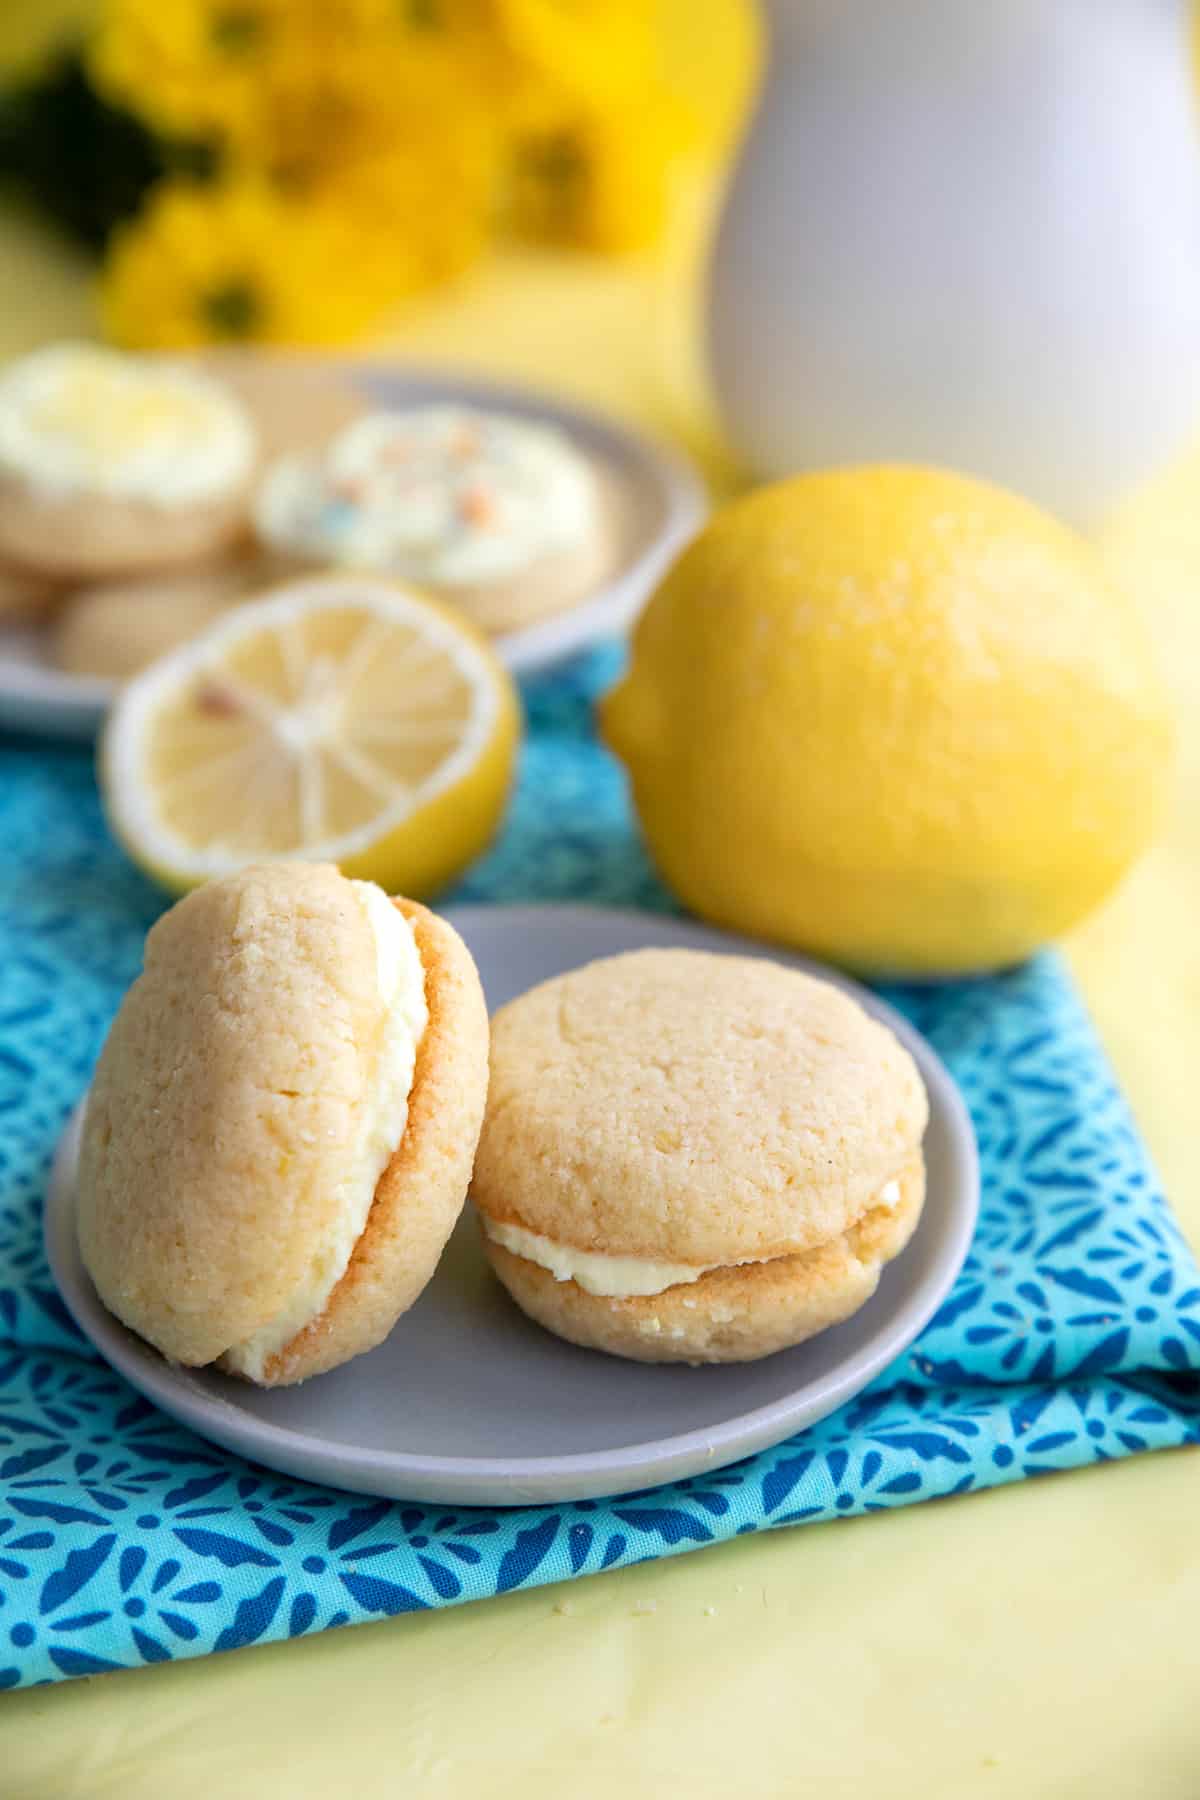 Two keto lemon cookies on a small plate over a patterned blue napkin, with lemons in the background.